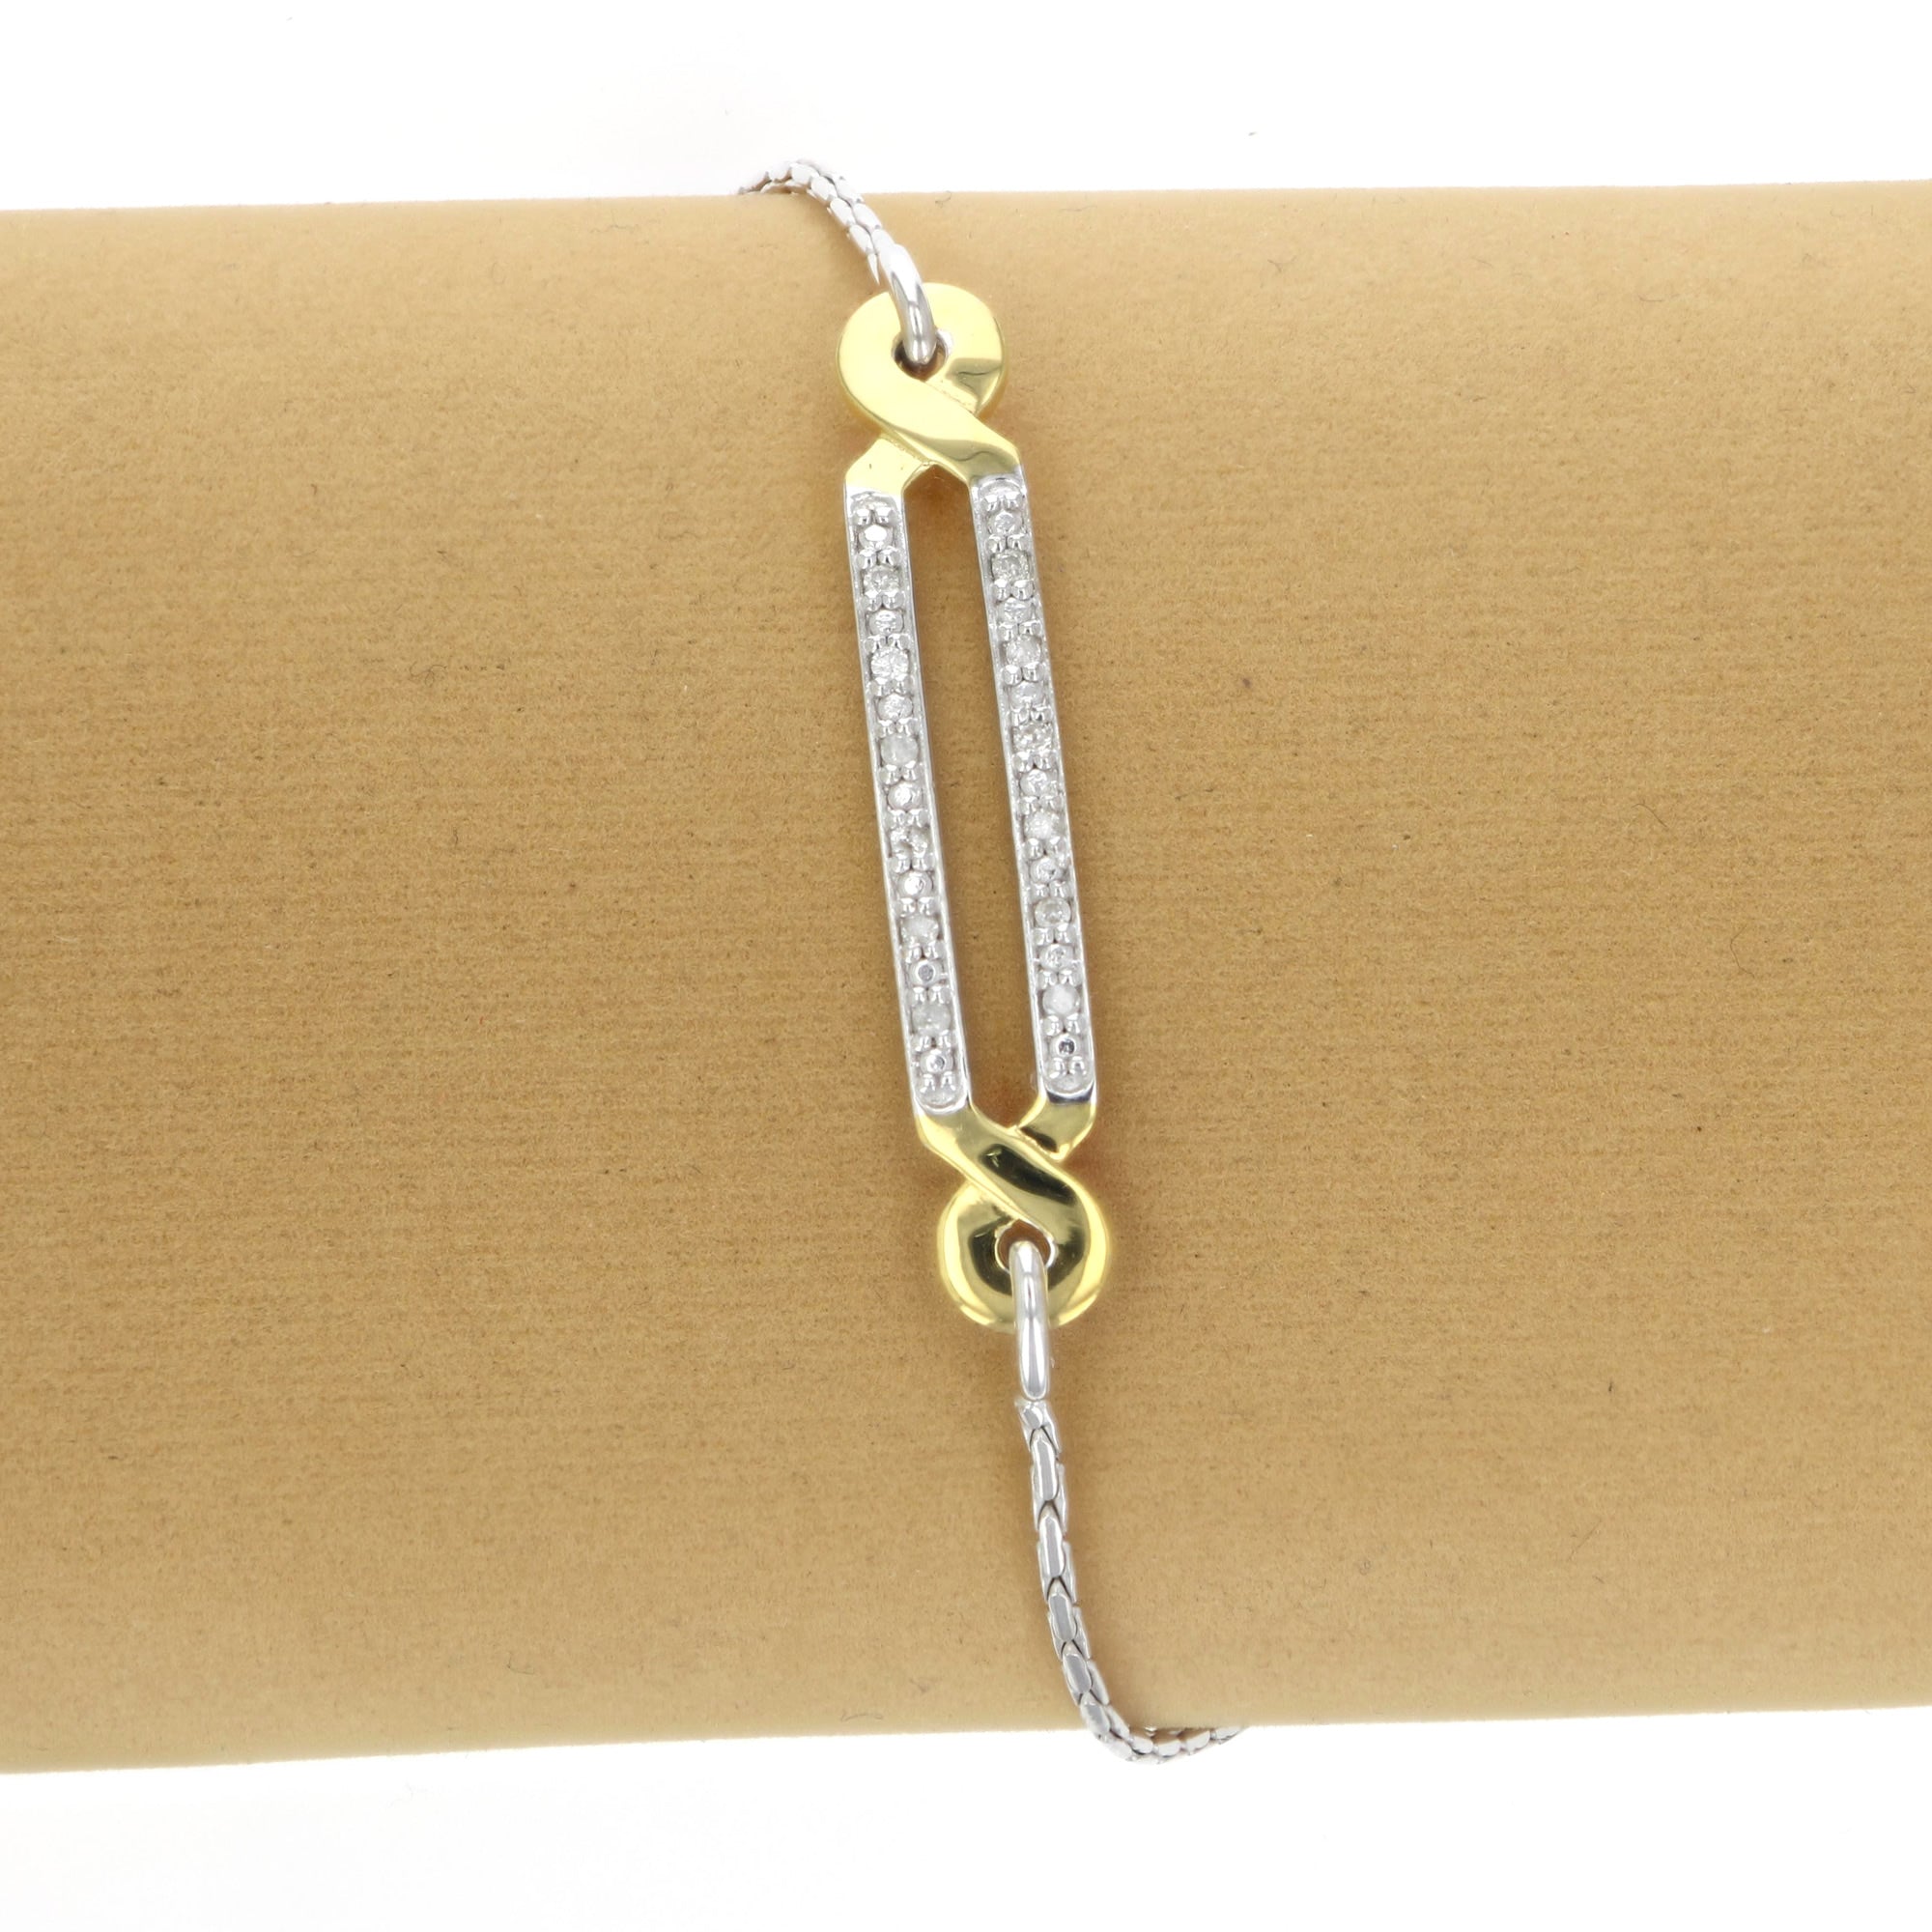 1/10 cttw Diamond Bolo Bracelet Yellow Gold Plated over Silver Two Row Style